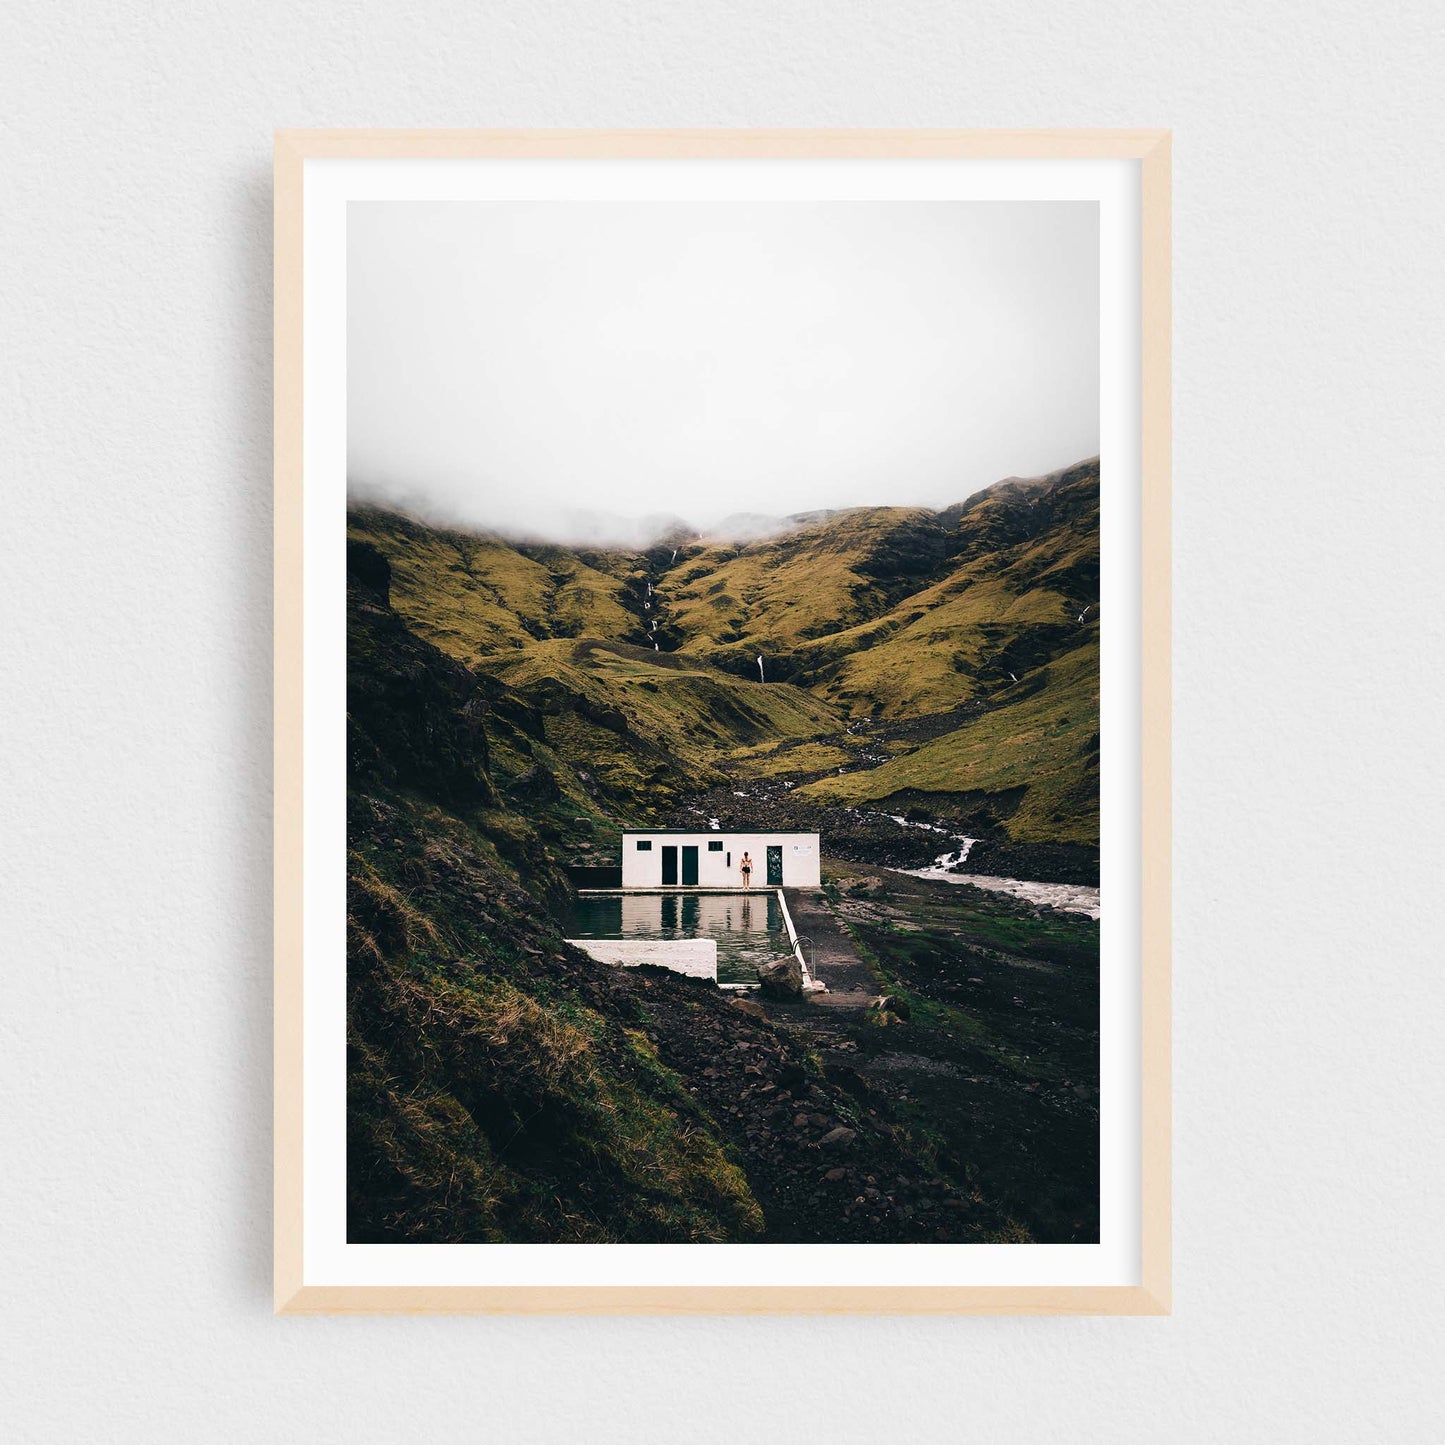 Iceland fine art photography print featuring Seljavallalaug pool, in a maple frame